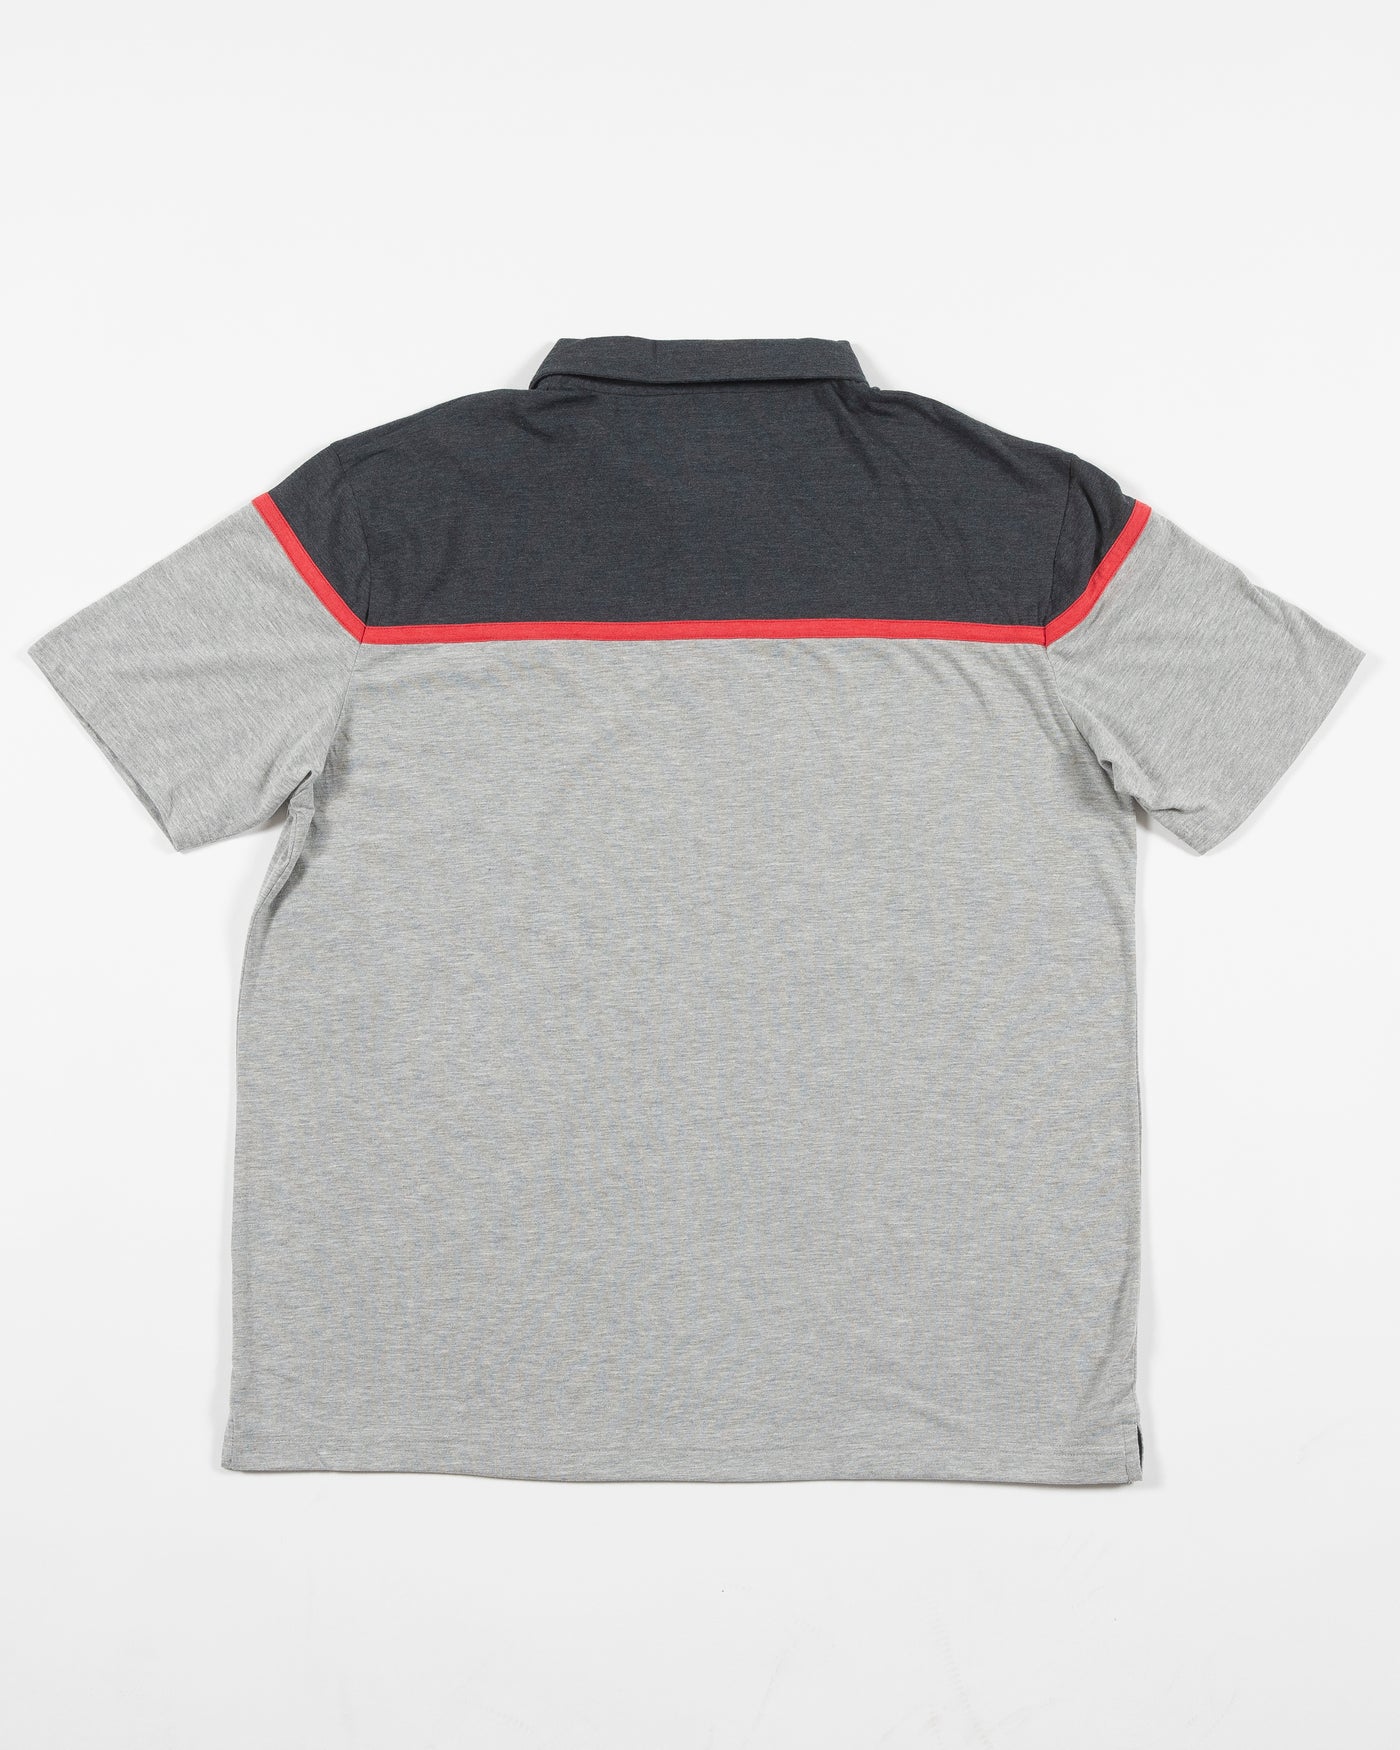 Colosseum two tone grey polo with Rockford IceHogs logo embroidered on upper left chest - back lay flat